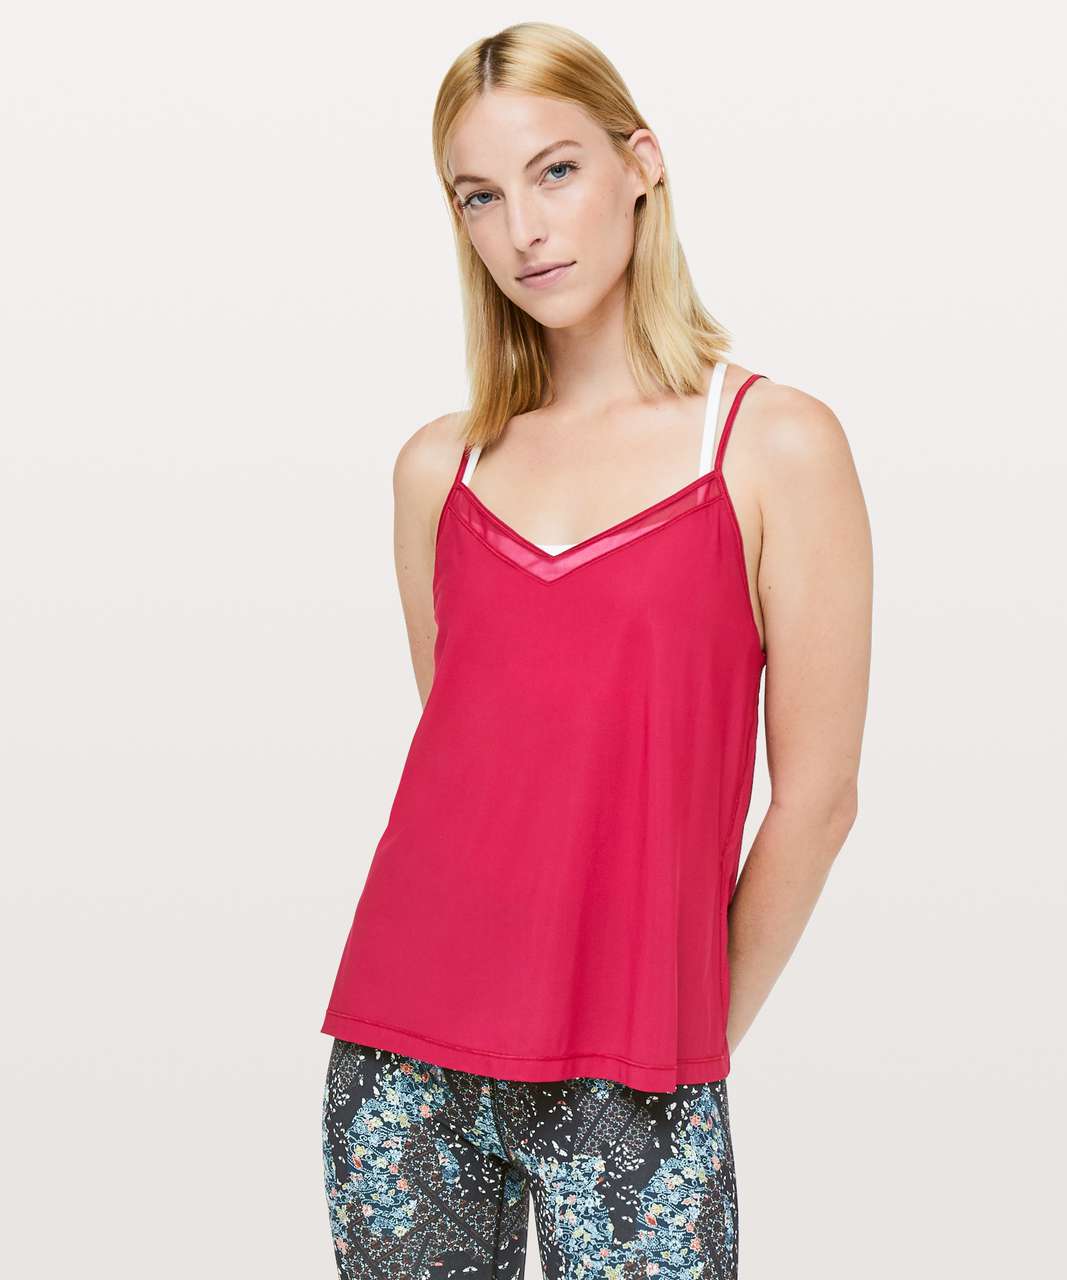 Lululemon Final Count Tank - Ruby Red 